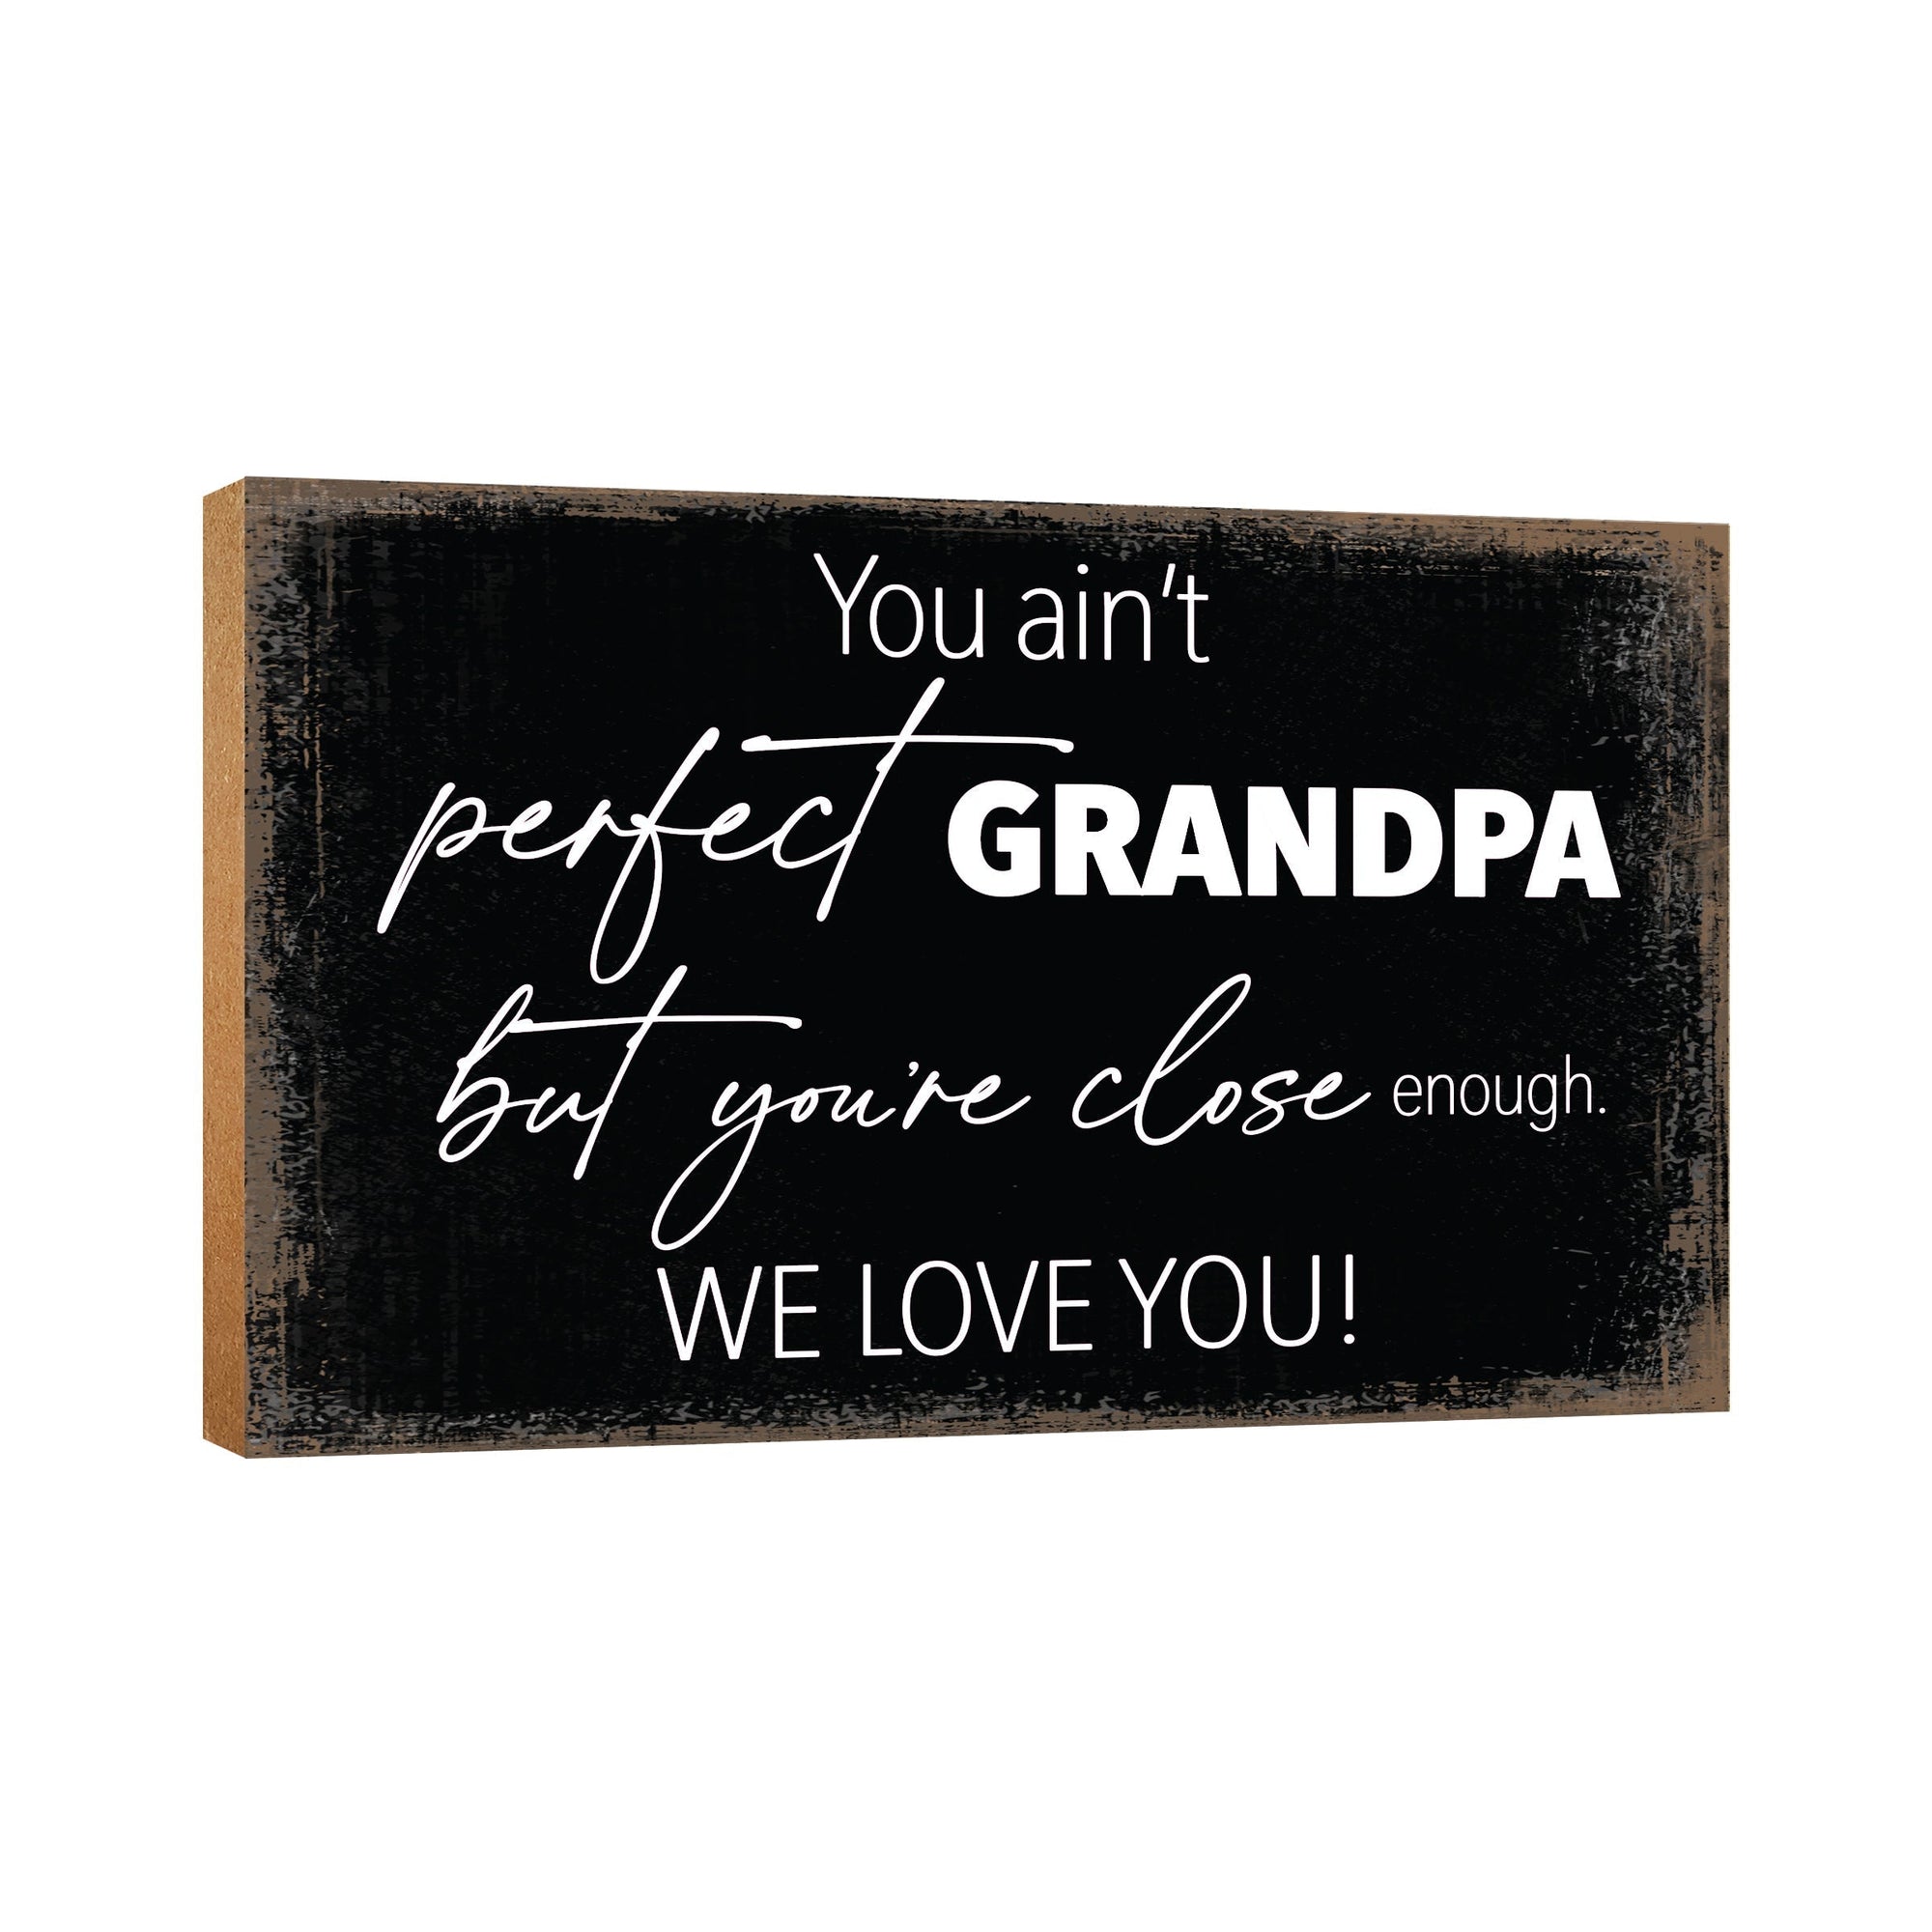 A wooden table top and shelf home décor gift for grandfather, a perfect gift for Father's Day.